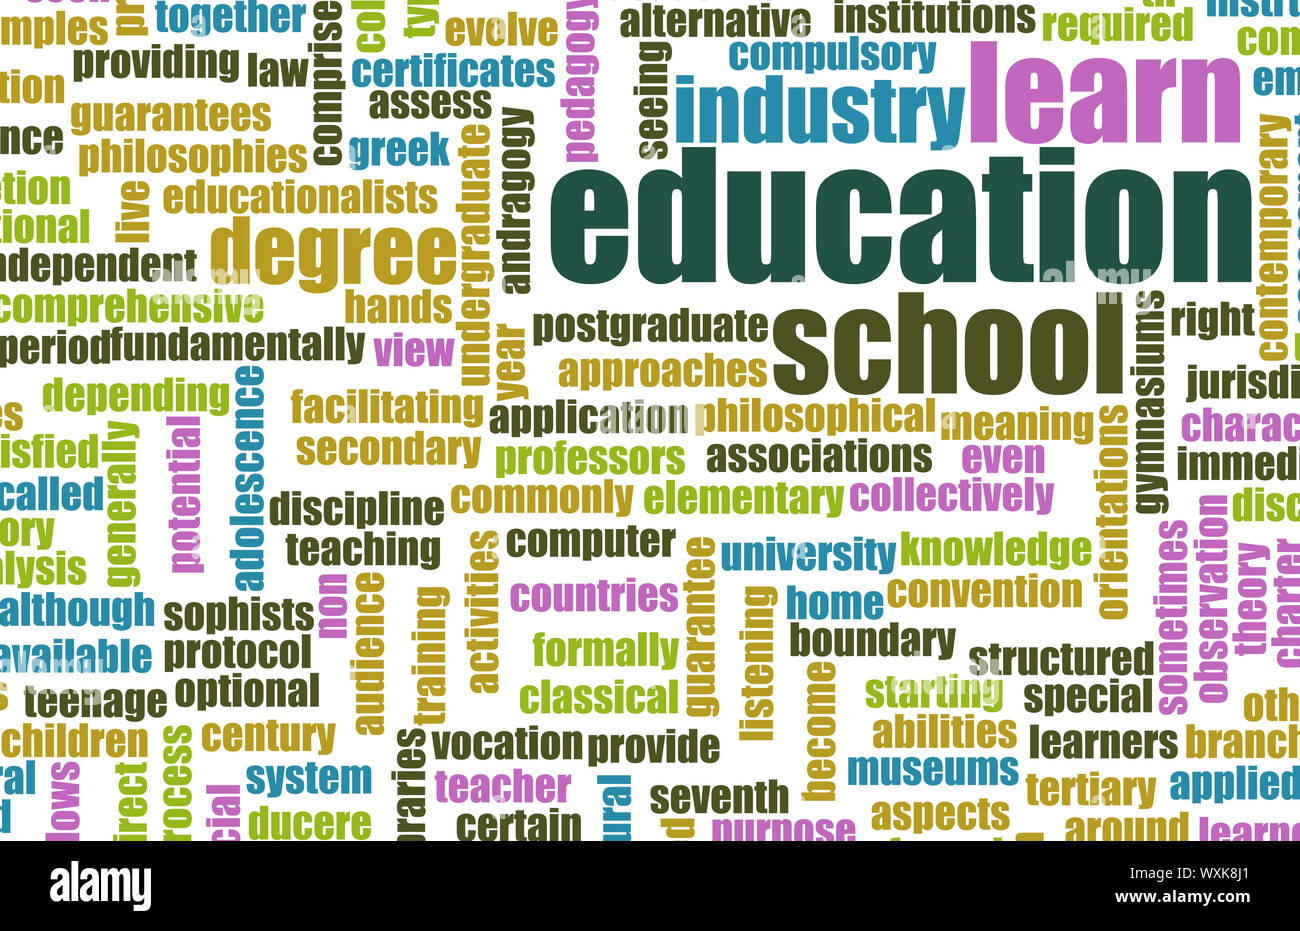 Education Sector and Other Related Terms as Art Stock Photo - Alamy